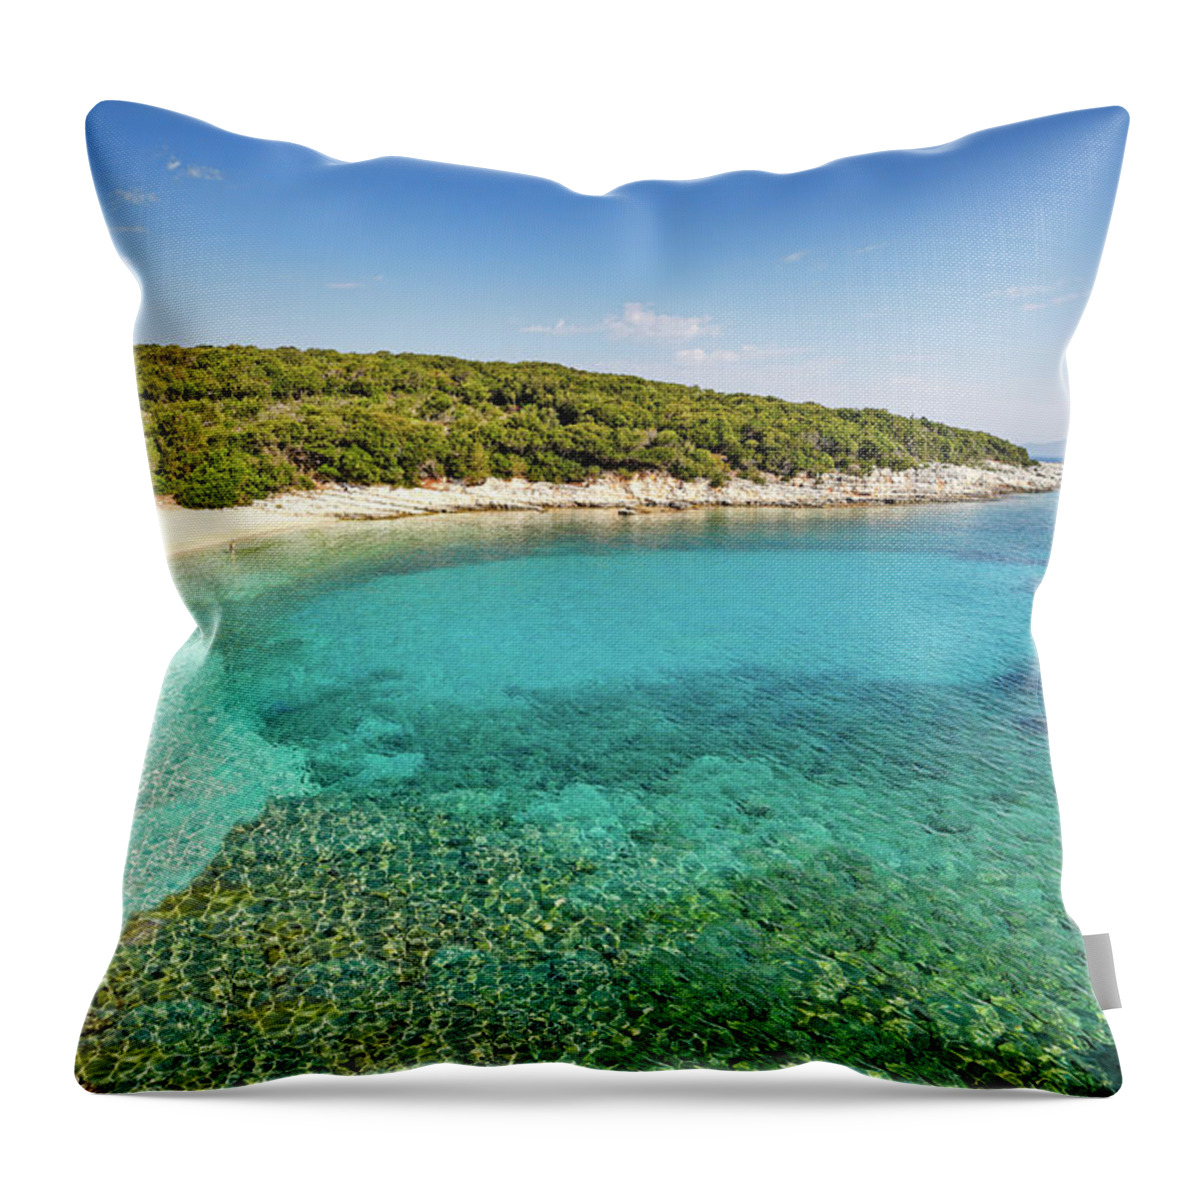 Emblisi Throw Pillow featuring the photograph Emblisi in Kefalonia, Greece by Constantinos Iliopoulos